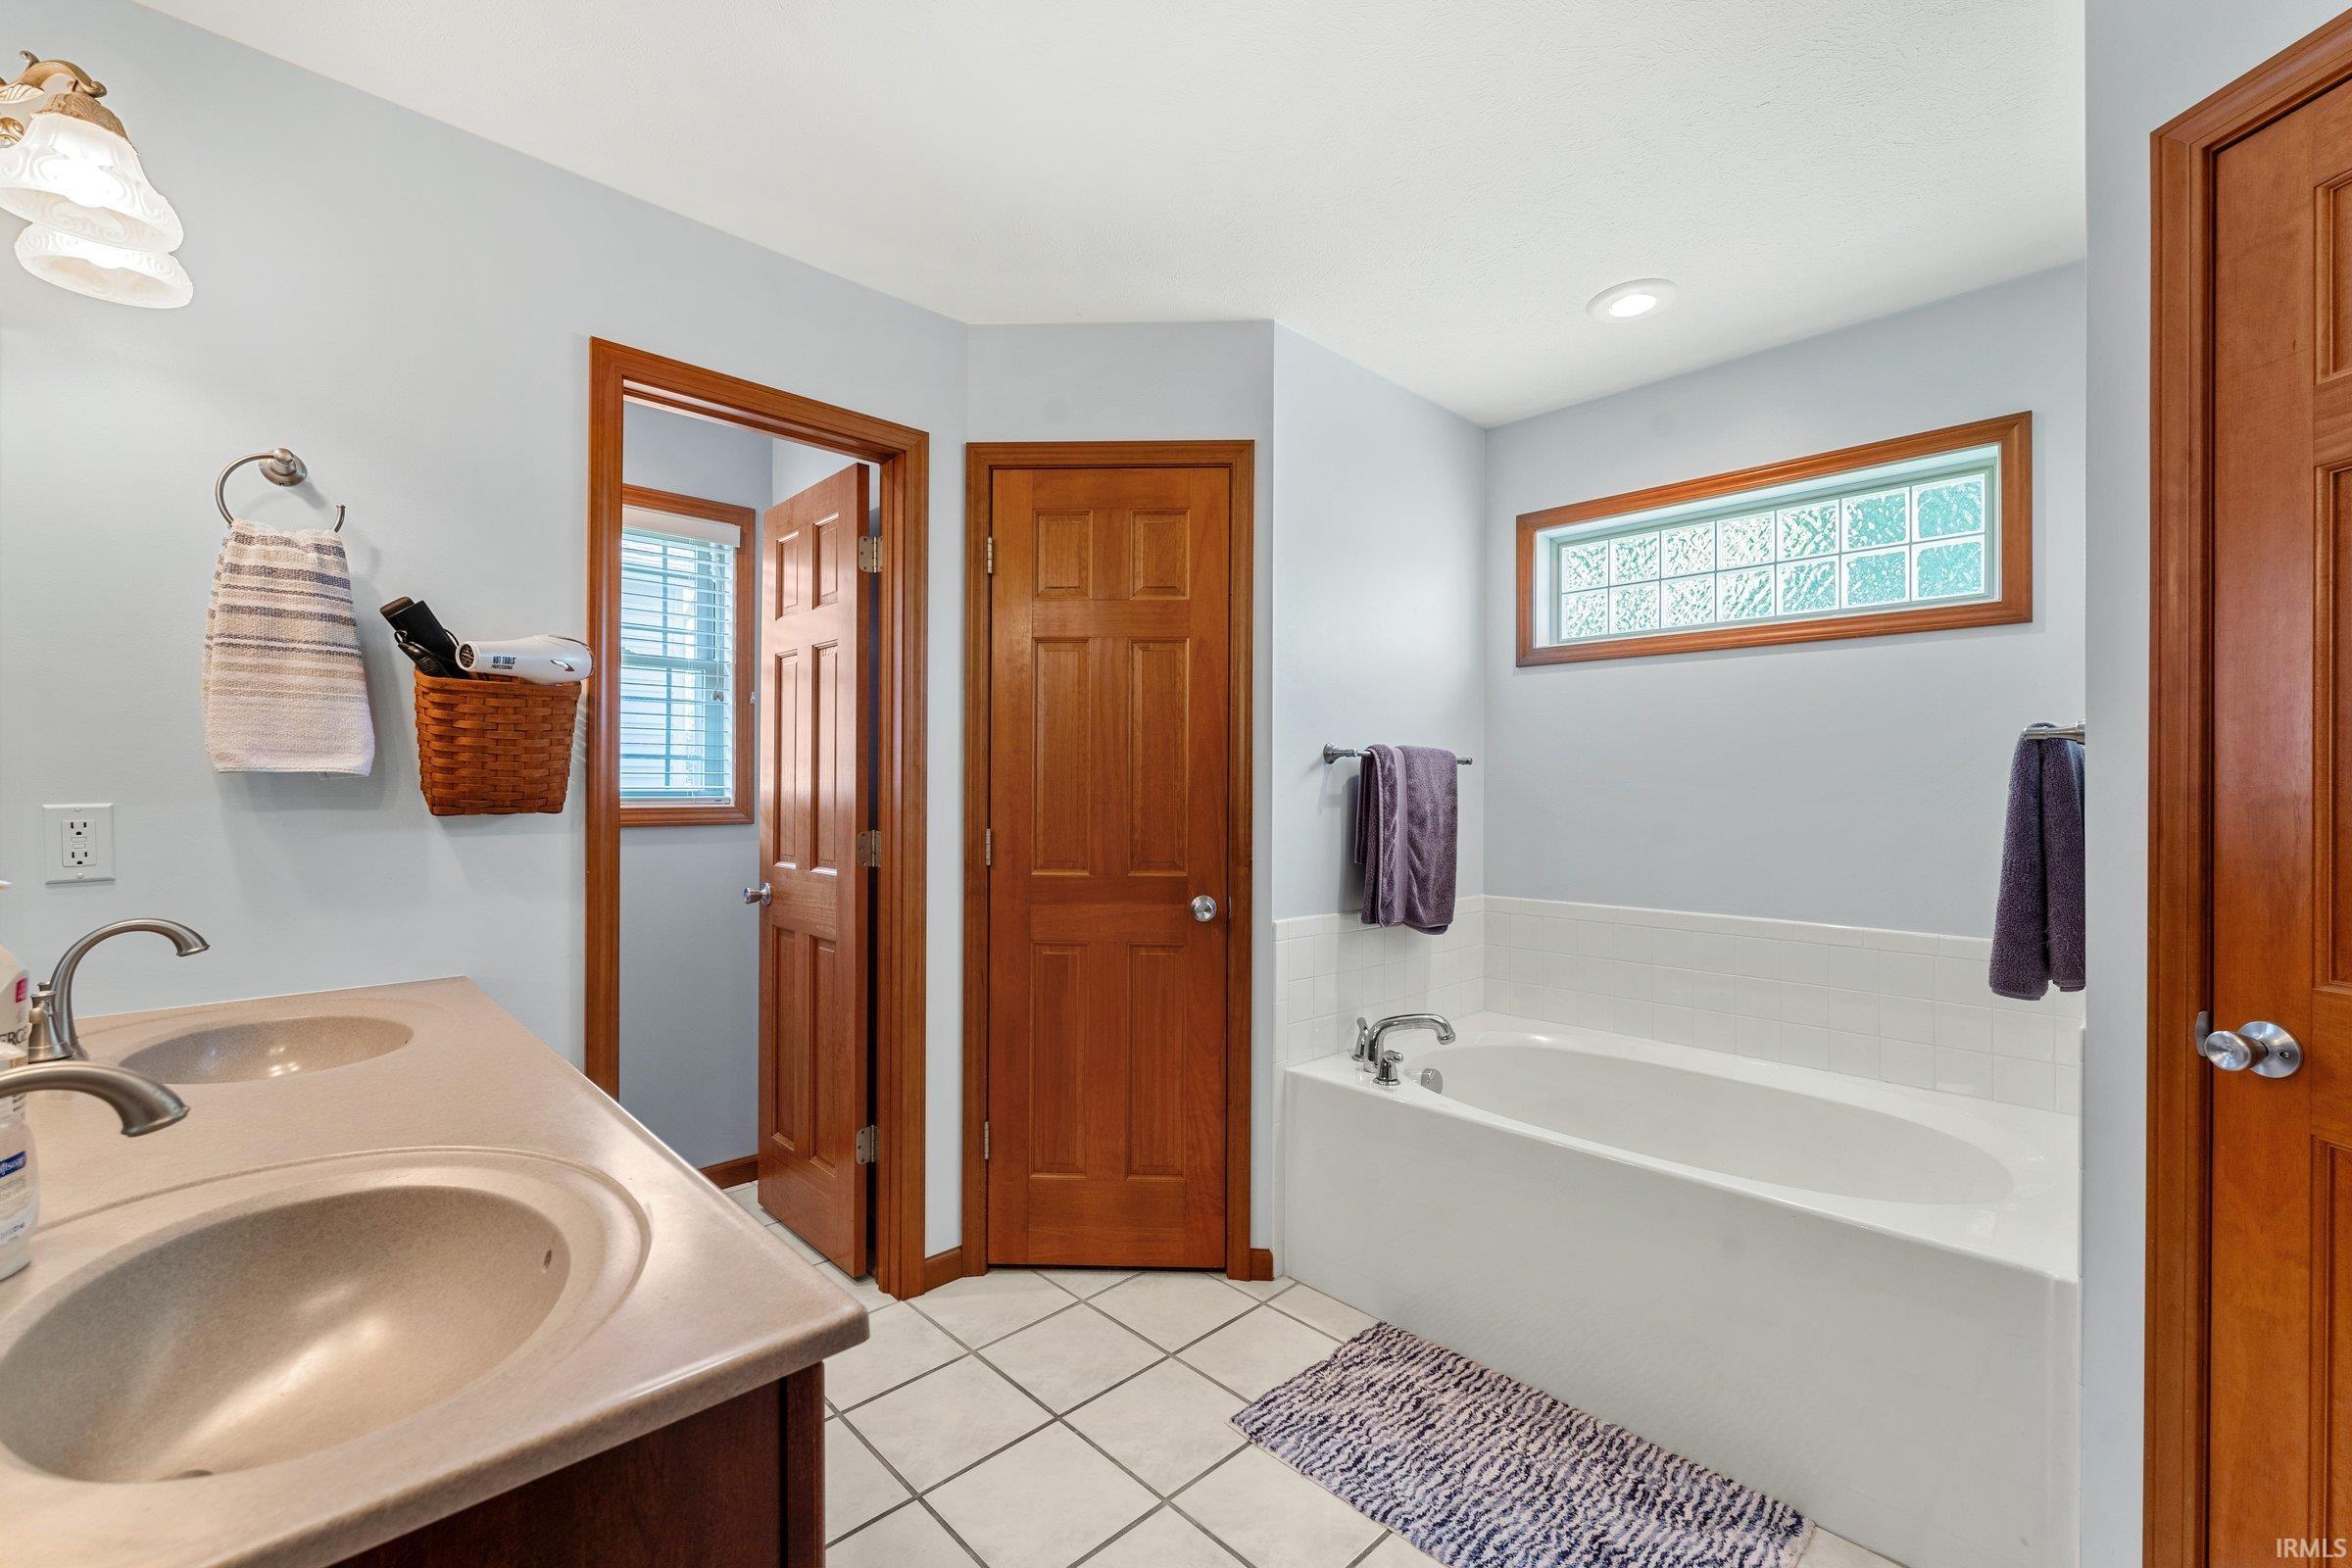 This bathroom includes his and hers walk-in closets.